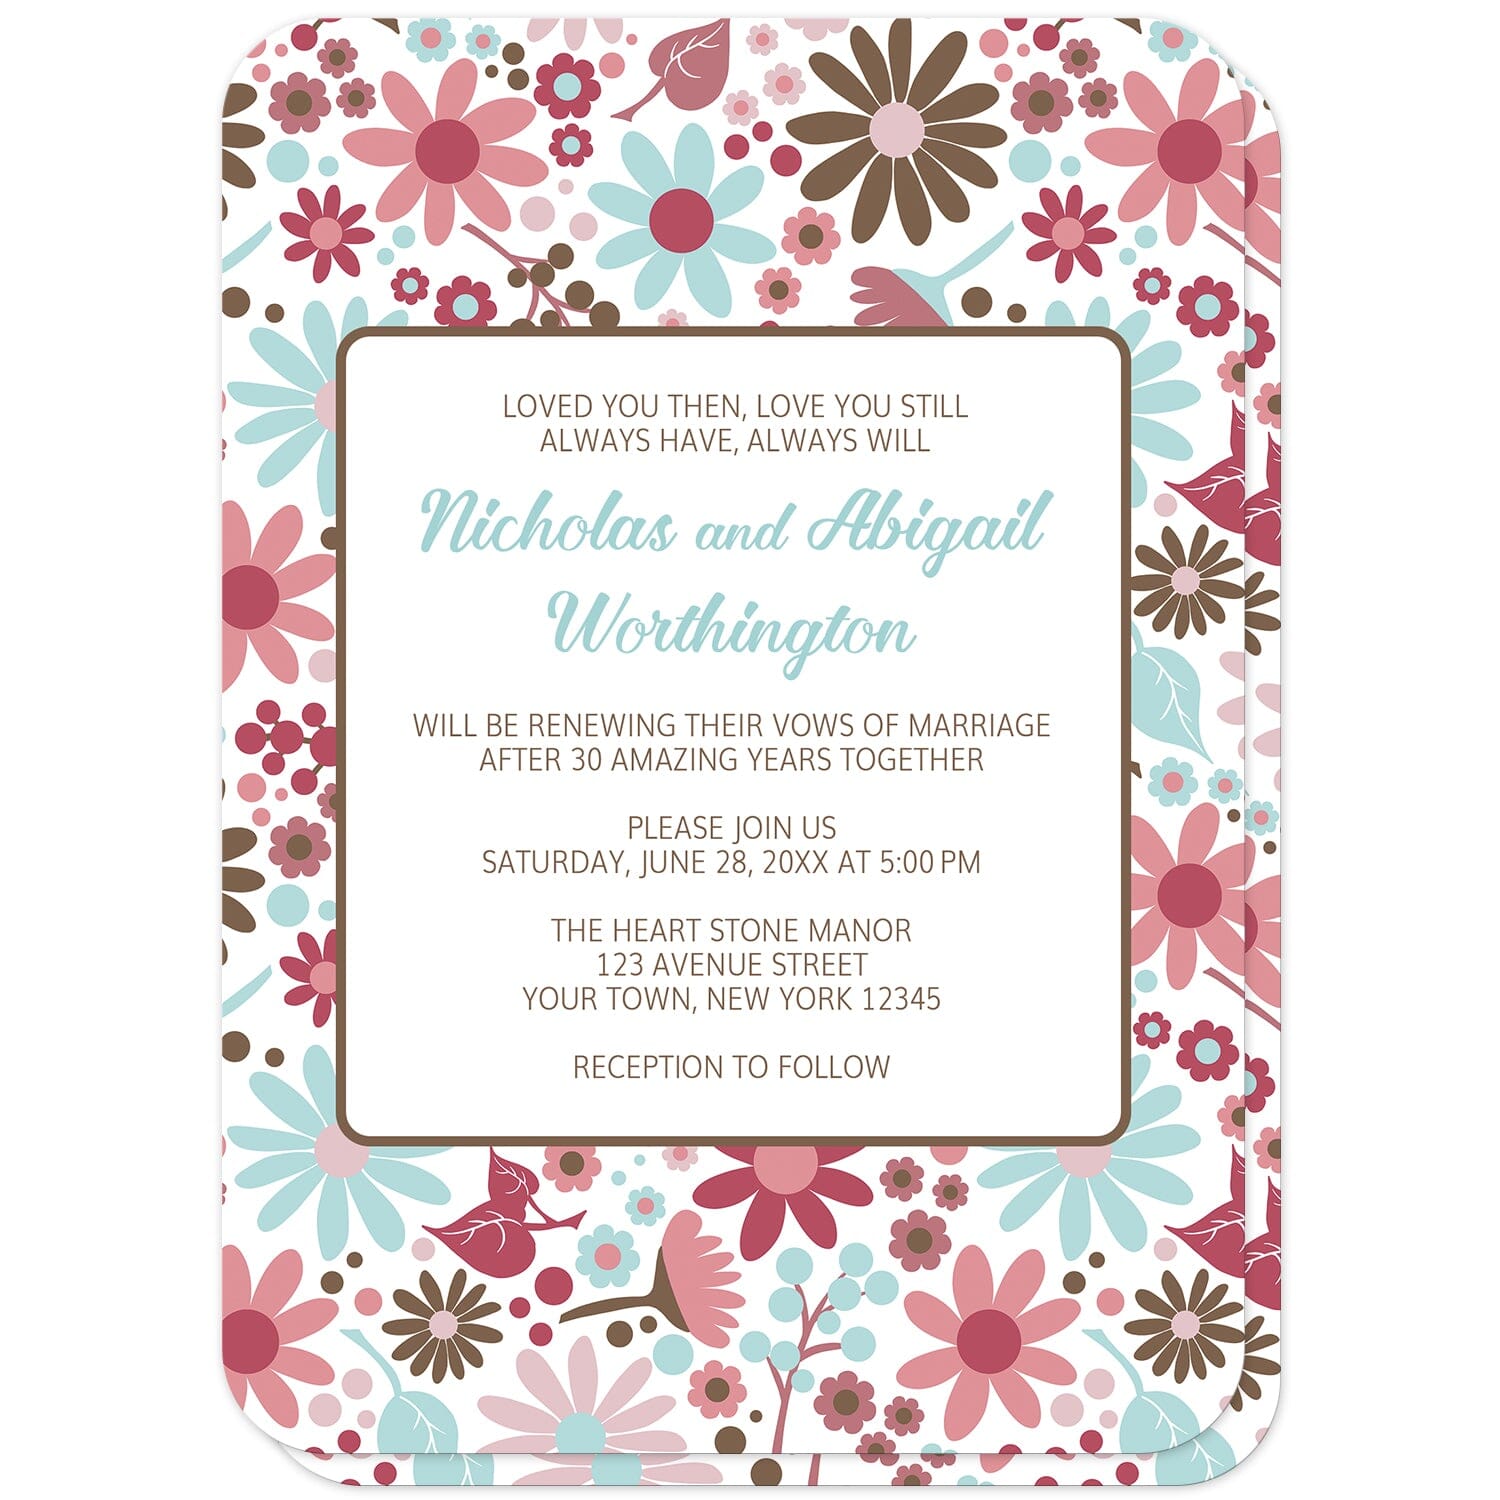 Berry Blue Summer Flowers Vow Renewal Invitations (front with rounded corners) at Artistically Invited.  Beautiful berry blue summer flowers vow renewal invitations designed with a pretty summer floral pattern in different hues of berry pink with blue and brown. Personalize these invitations with your occasion details for renewing your vows. They're a gorgeous option for any couple who loves floral designs as they're covered in this flowers pattern on both the front and back of the invitations. 